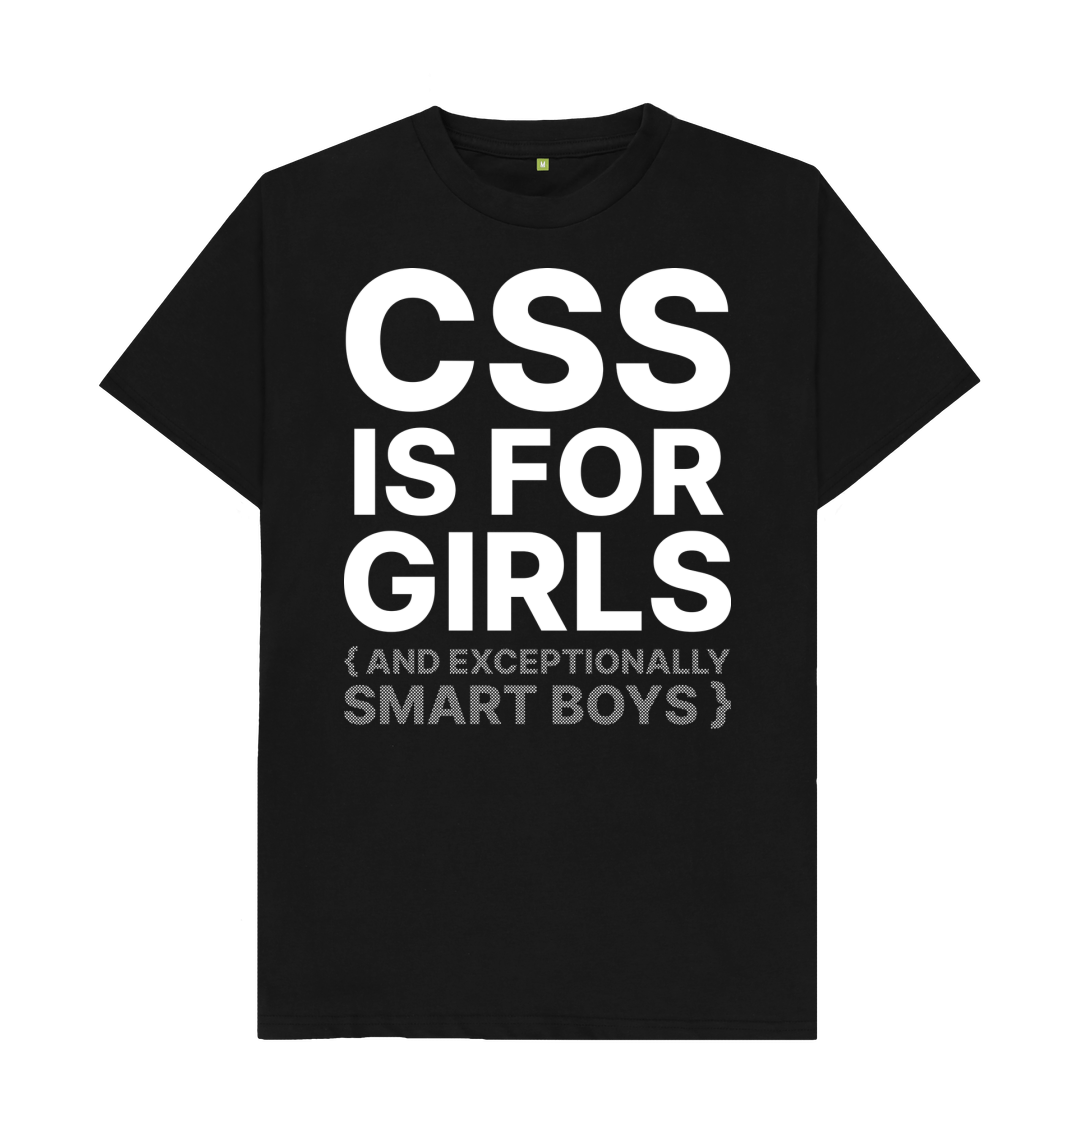 (CSS is for girls and exceptionally smart boys.)